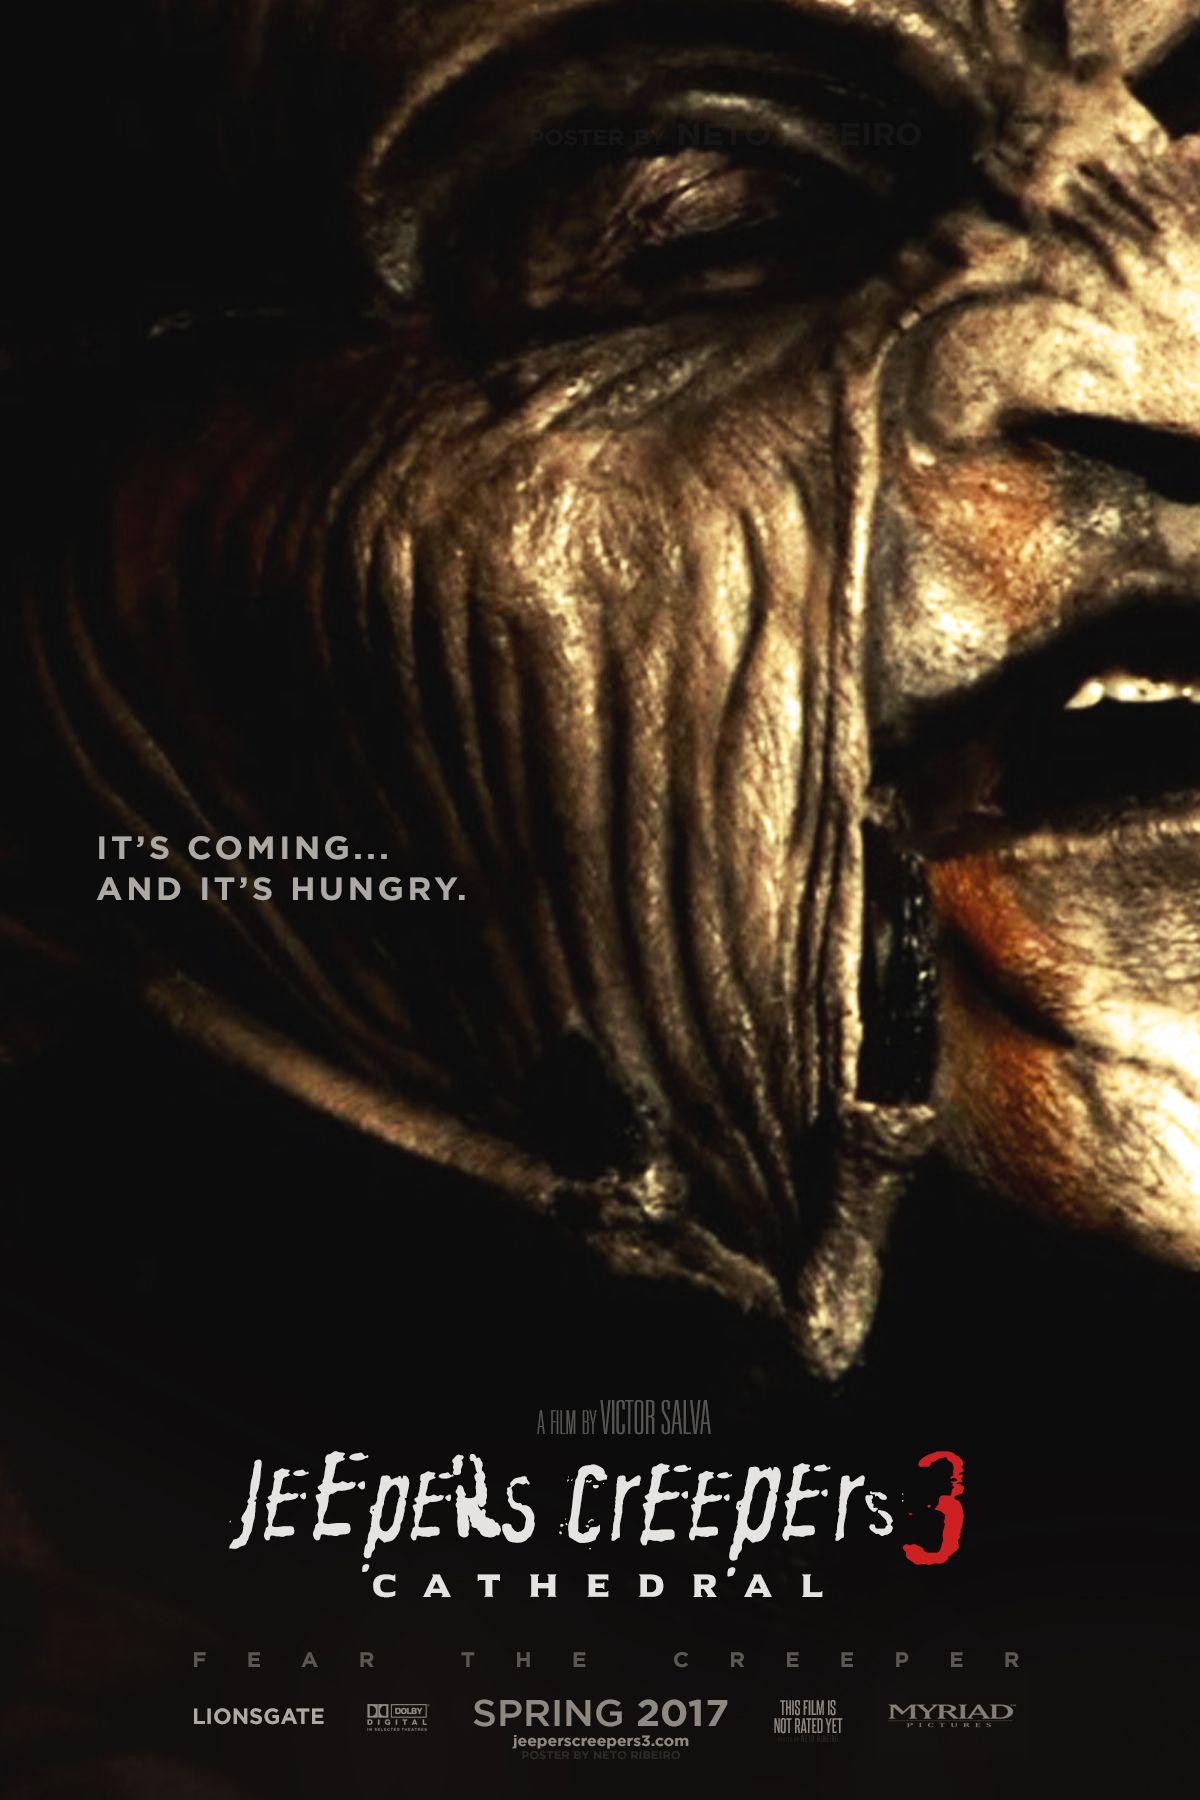 Jeepers Creepers 3” is Finally Done Filming!